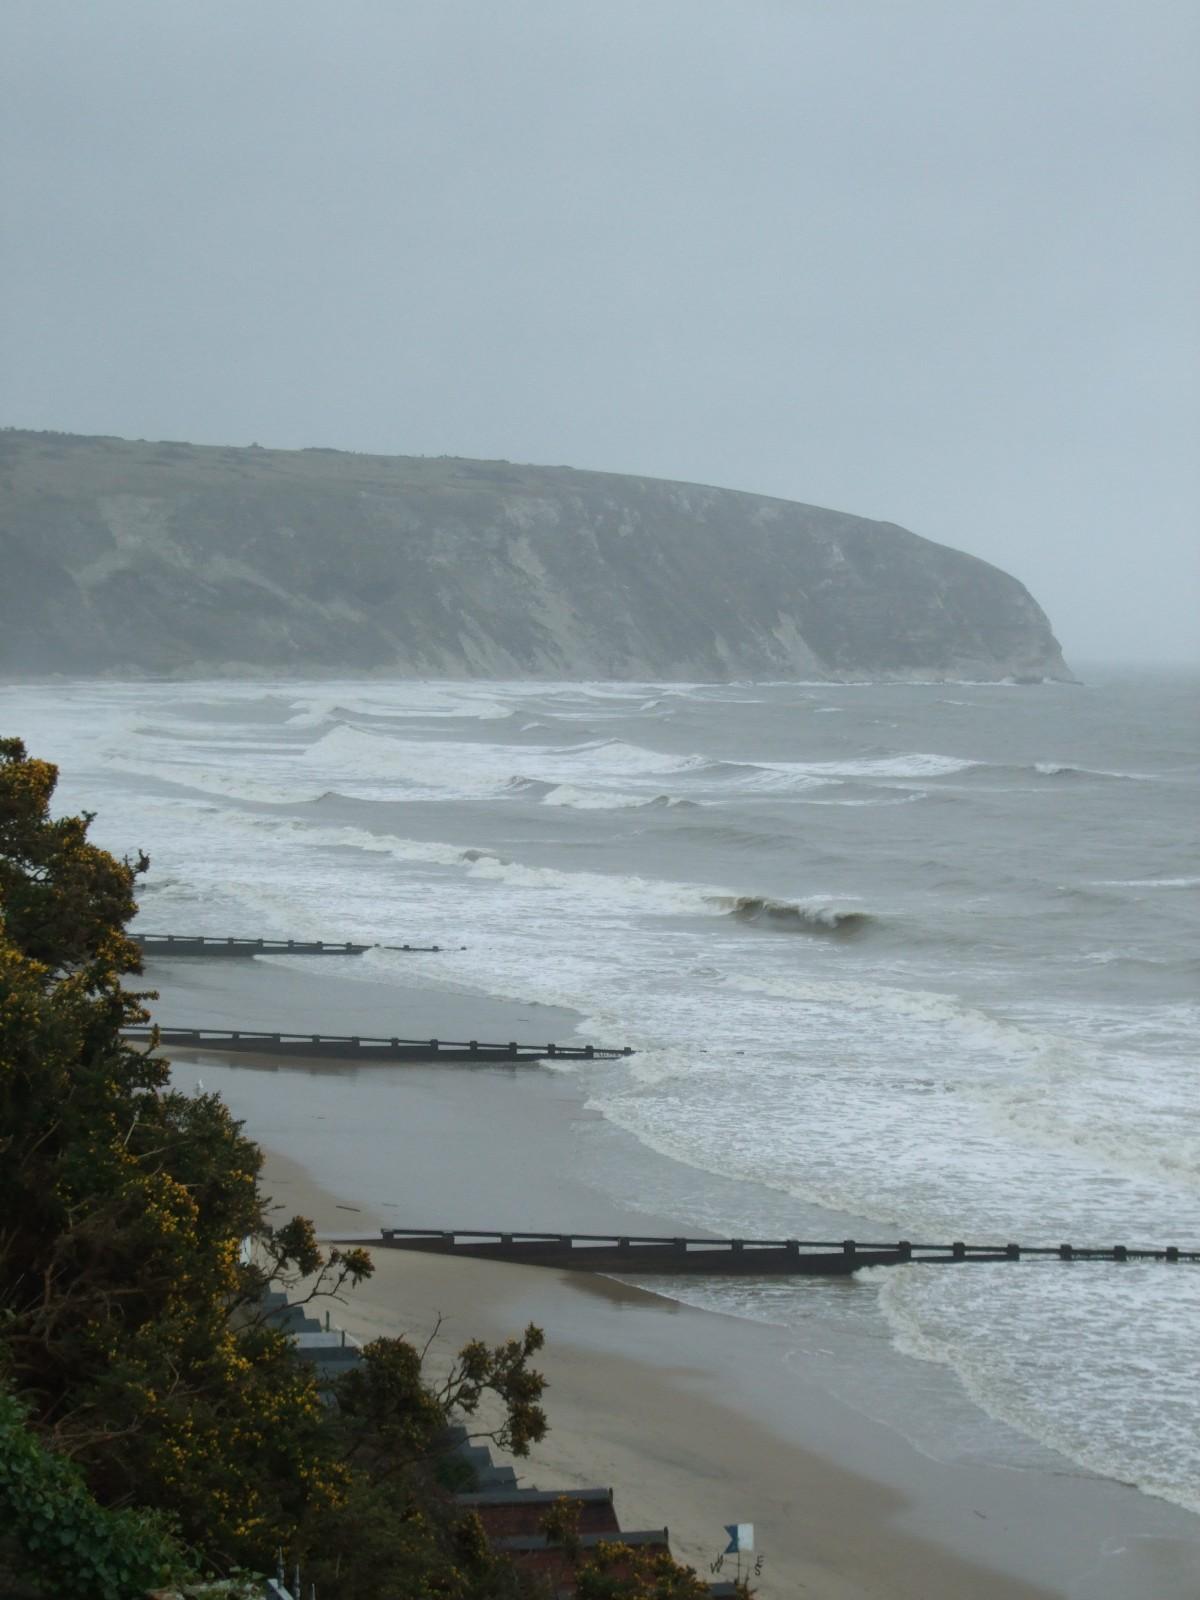 Strong winds at Swanage Bay. Picture by Jeff Soulsby.